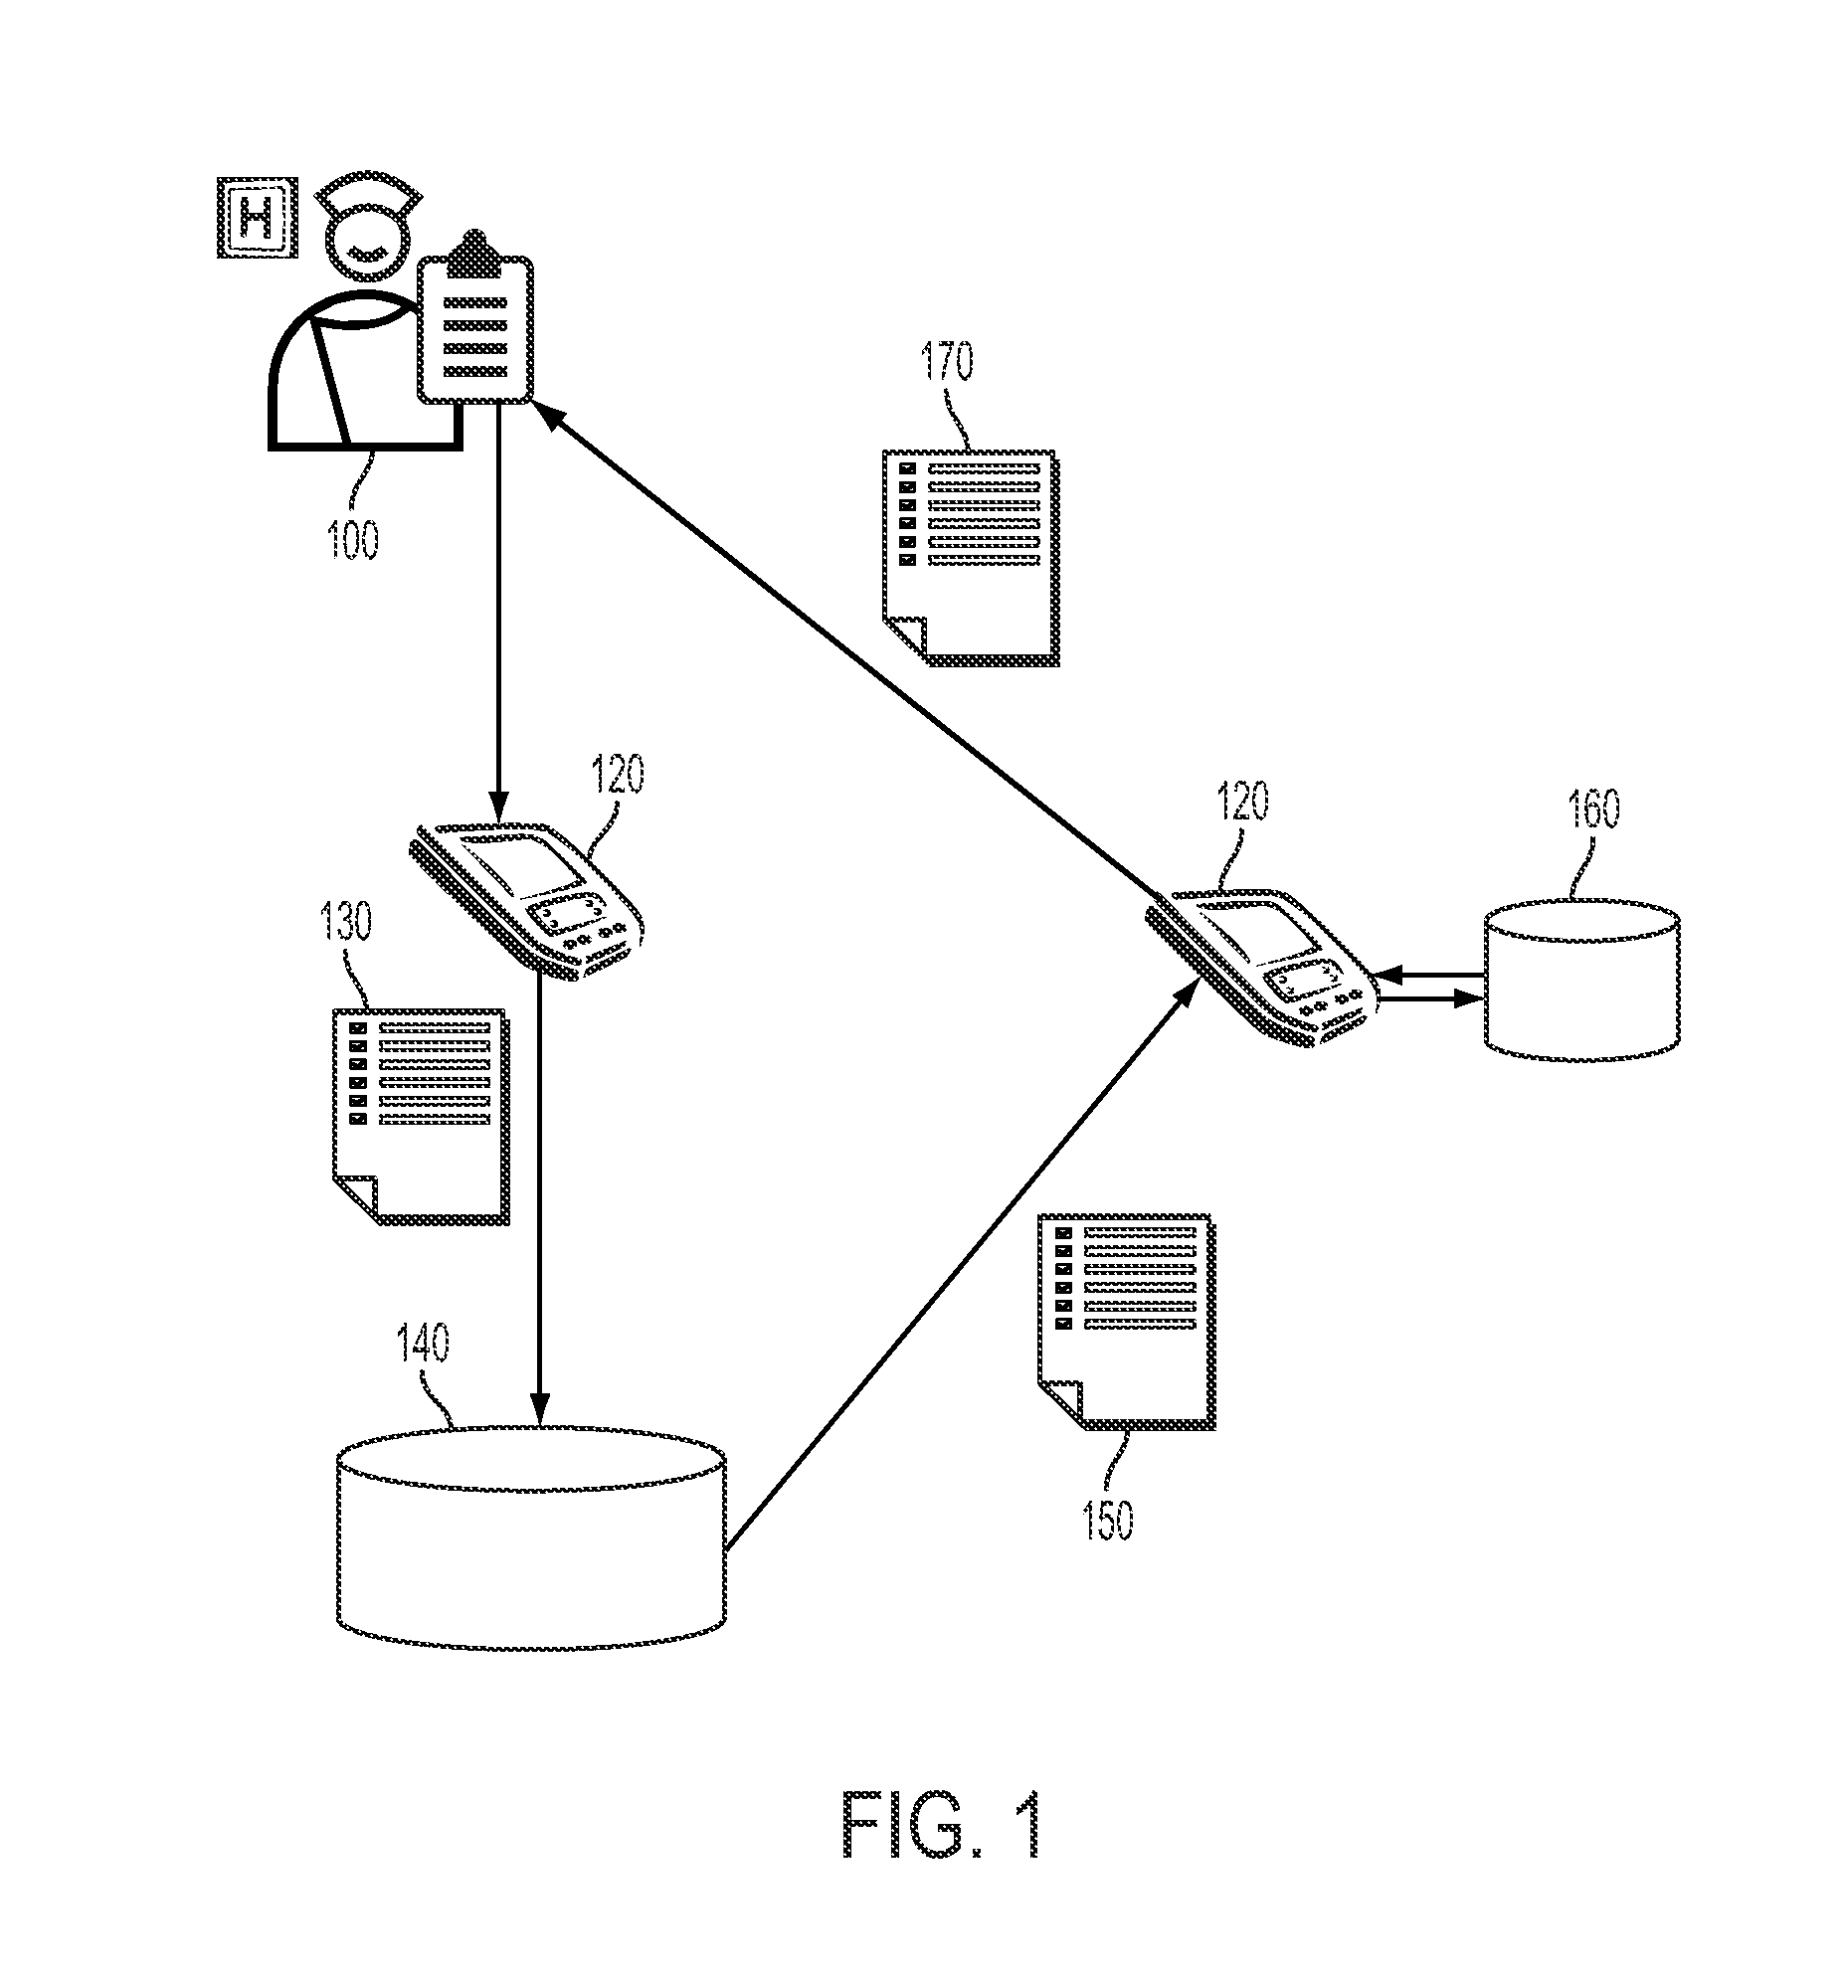 System for automatically filling in paper forms with electronic data